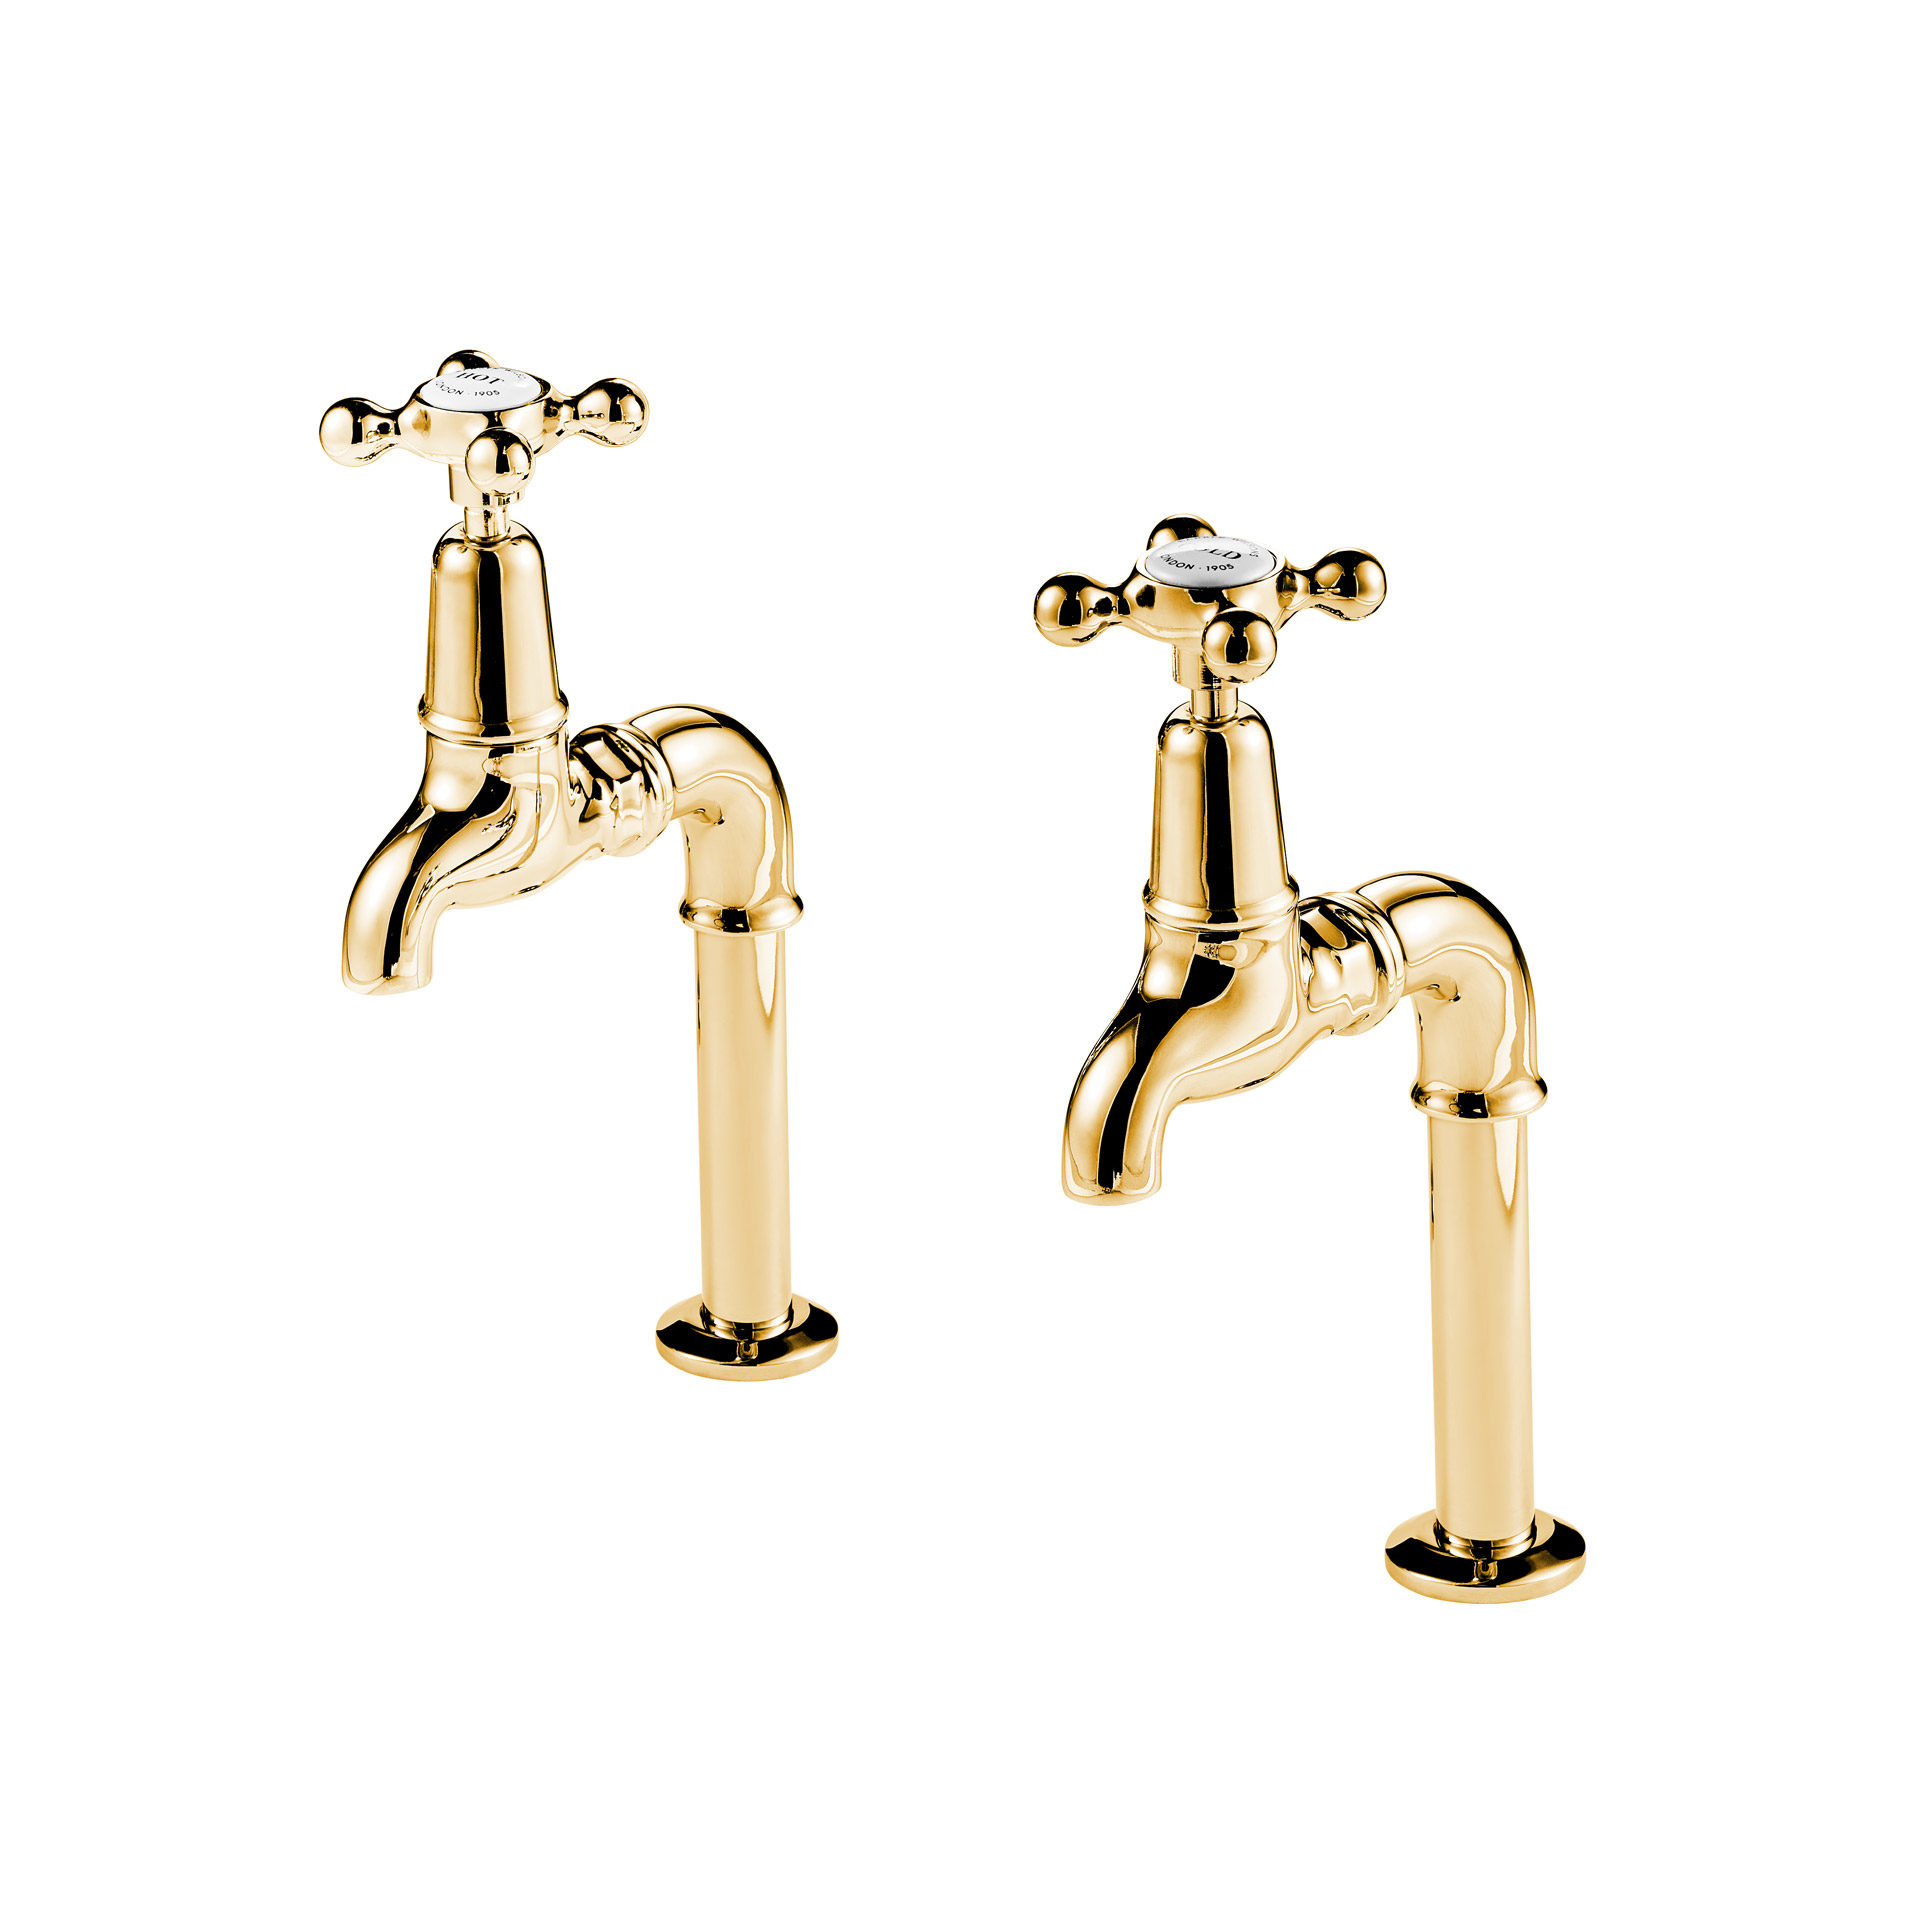 Barber Wilsons 6" Deck and Wall Mounted Brass Bib Taps with Crosshead - Regent 260, 1900's Style